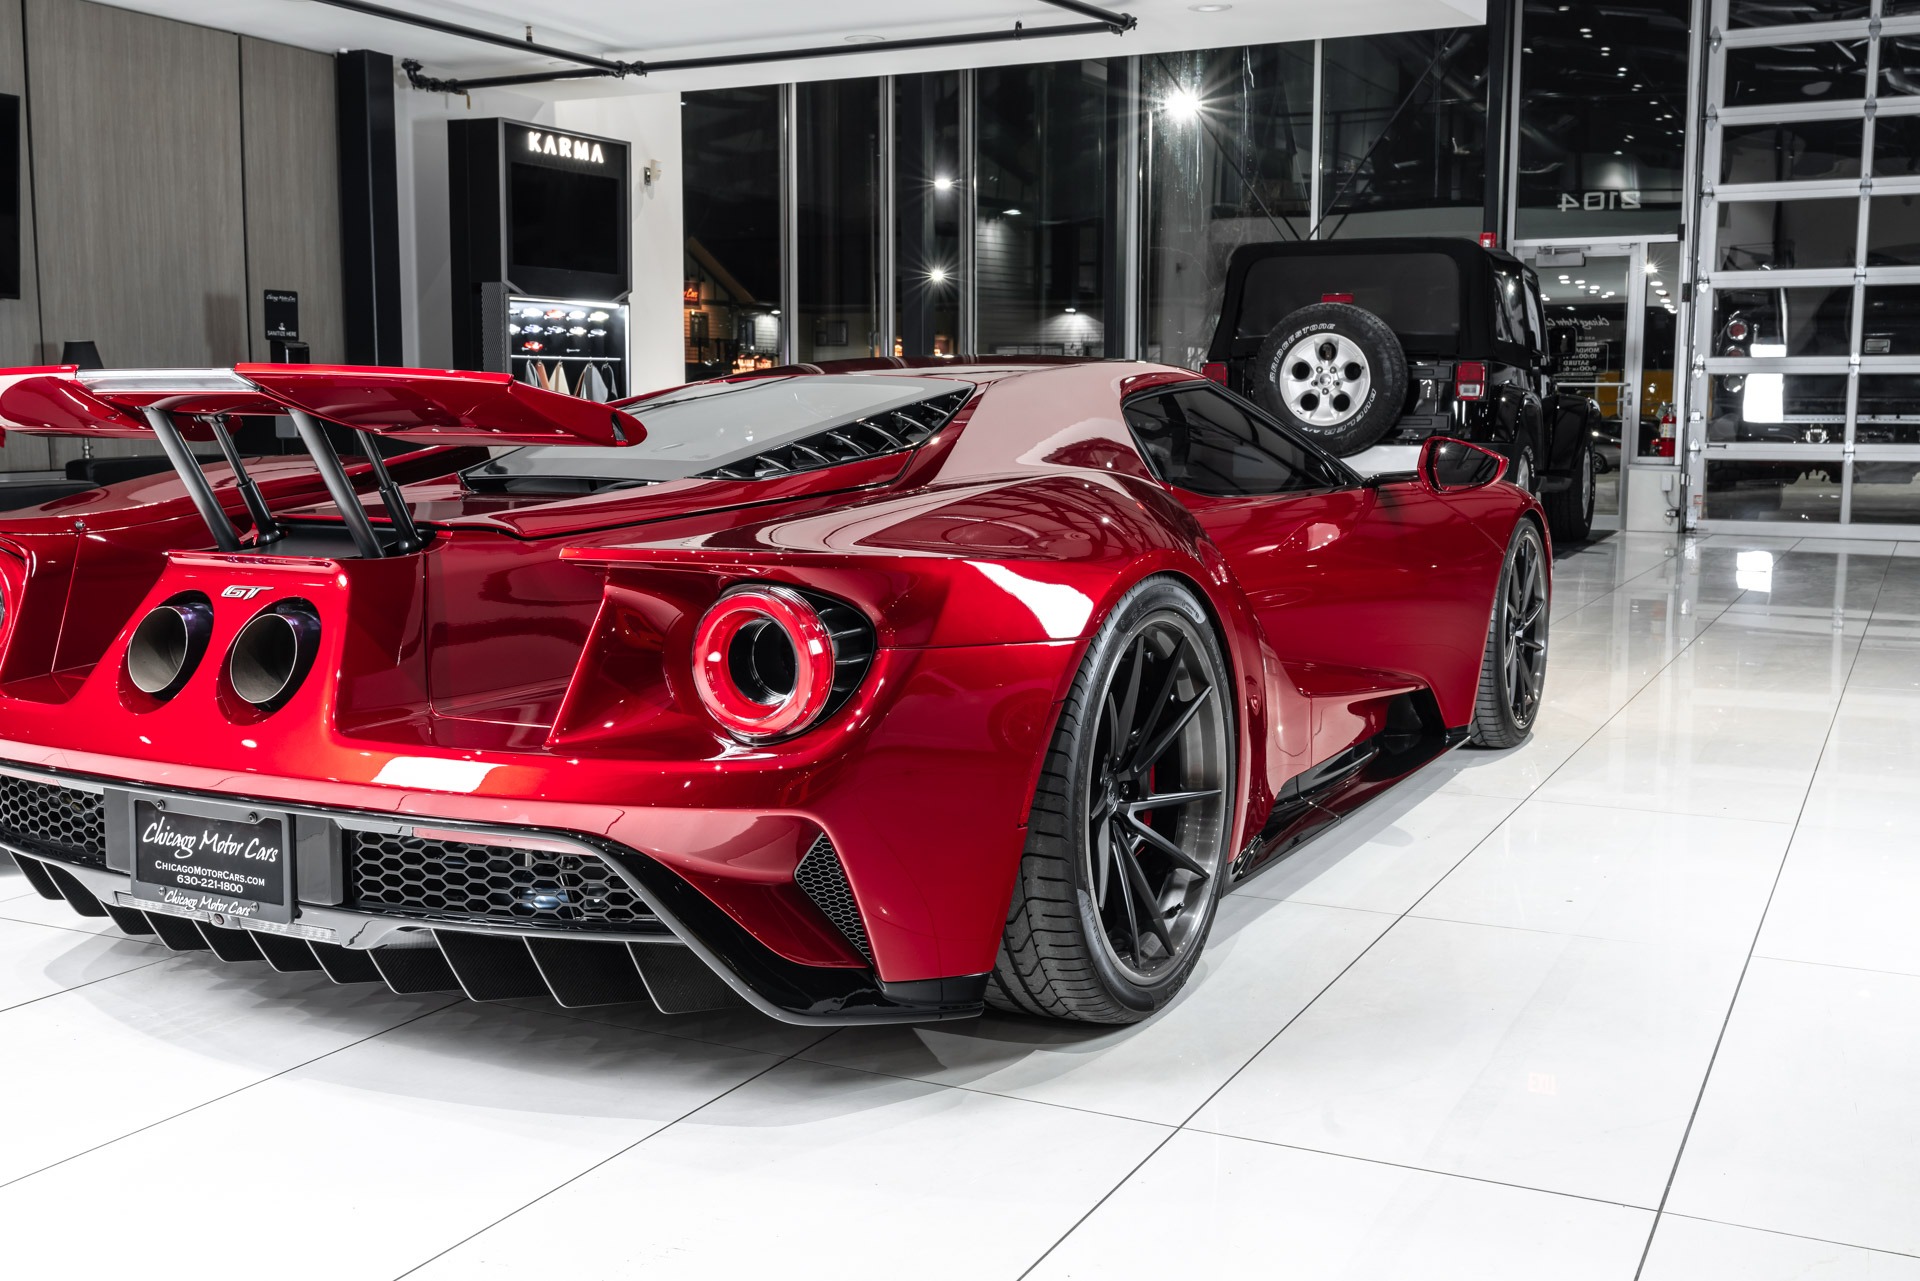 Used-2019-Ford-GT-Coupe-Liquid-Red-ONLY-912-Miles-ANRKY-Wheels-FULL-PPF-Stunning-Example